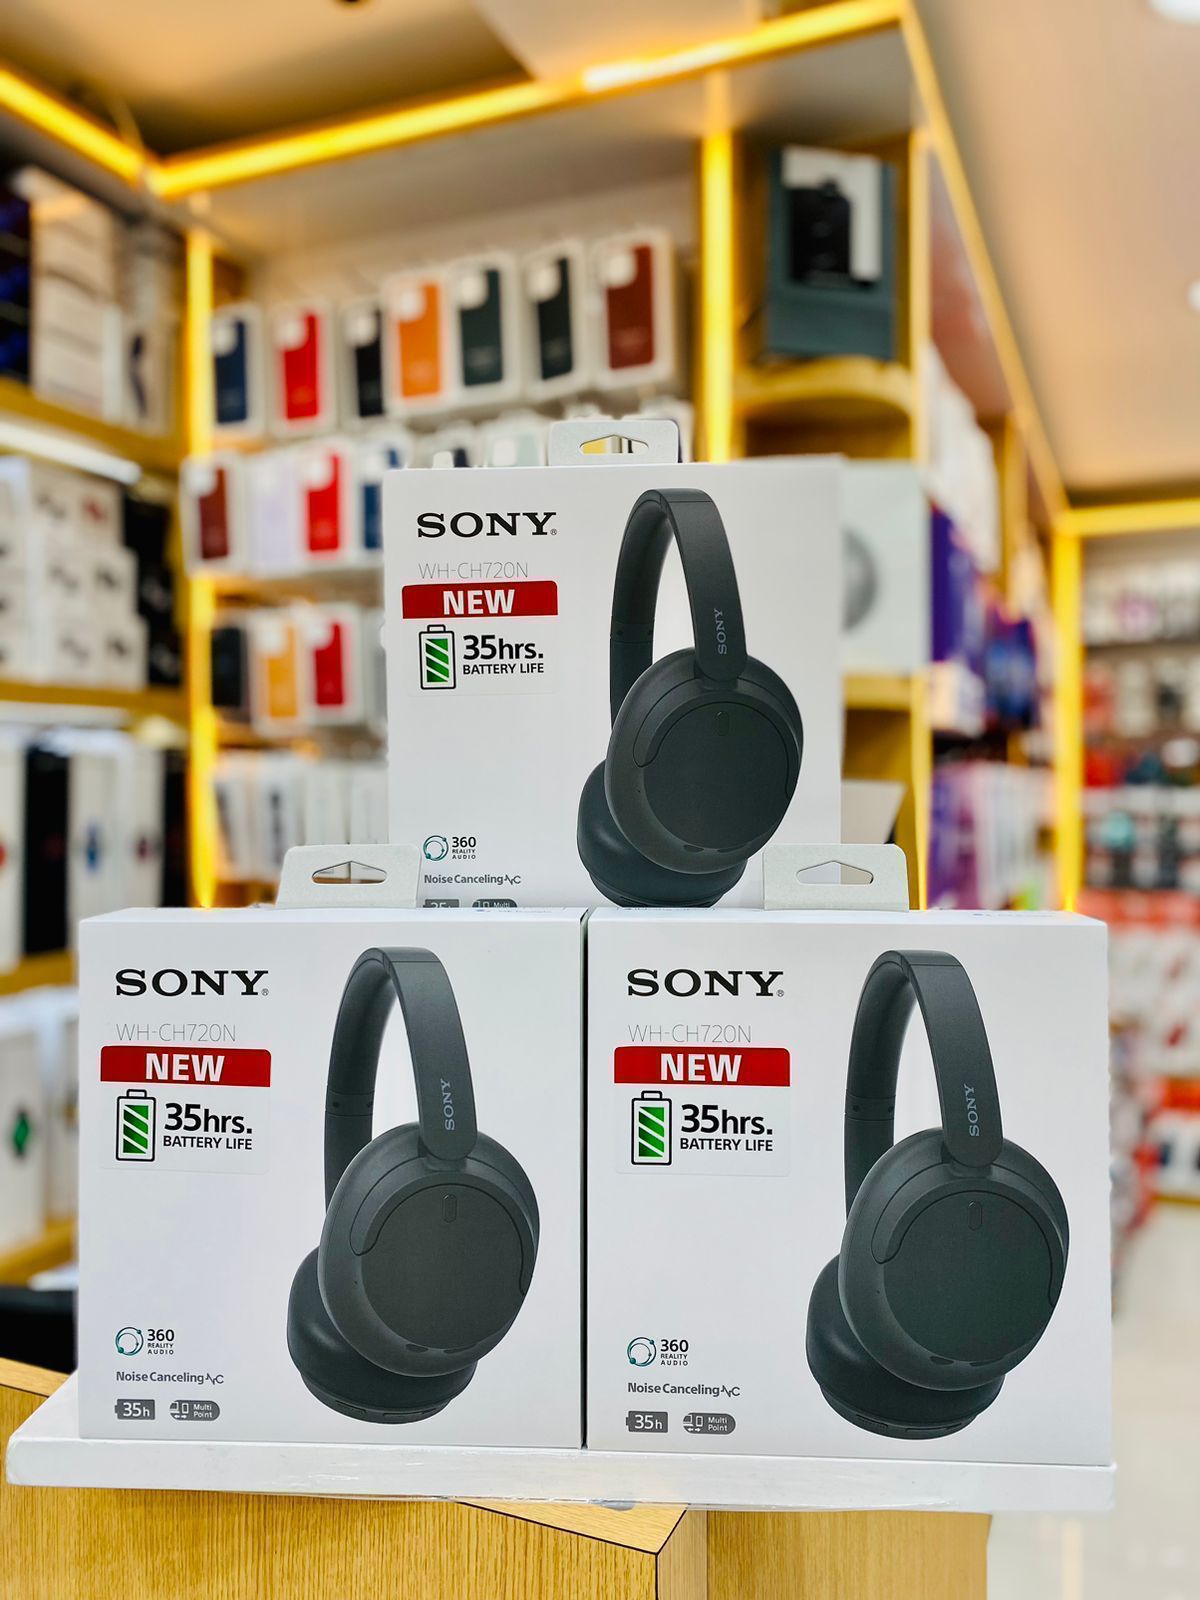 SONY WH CH 720